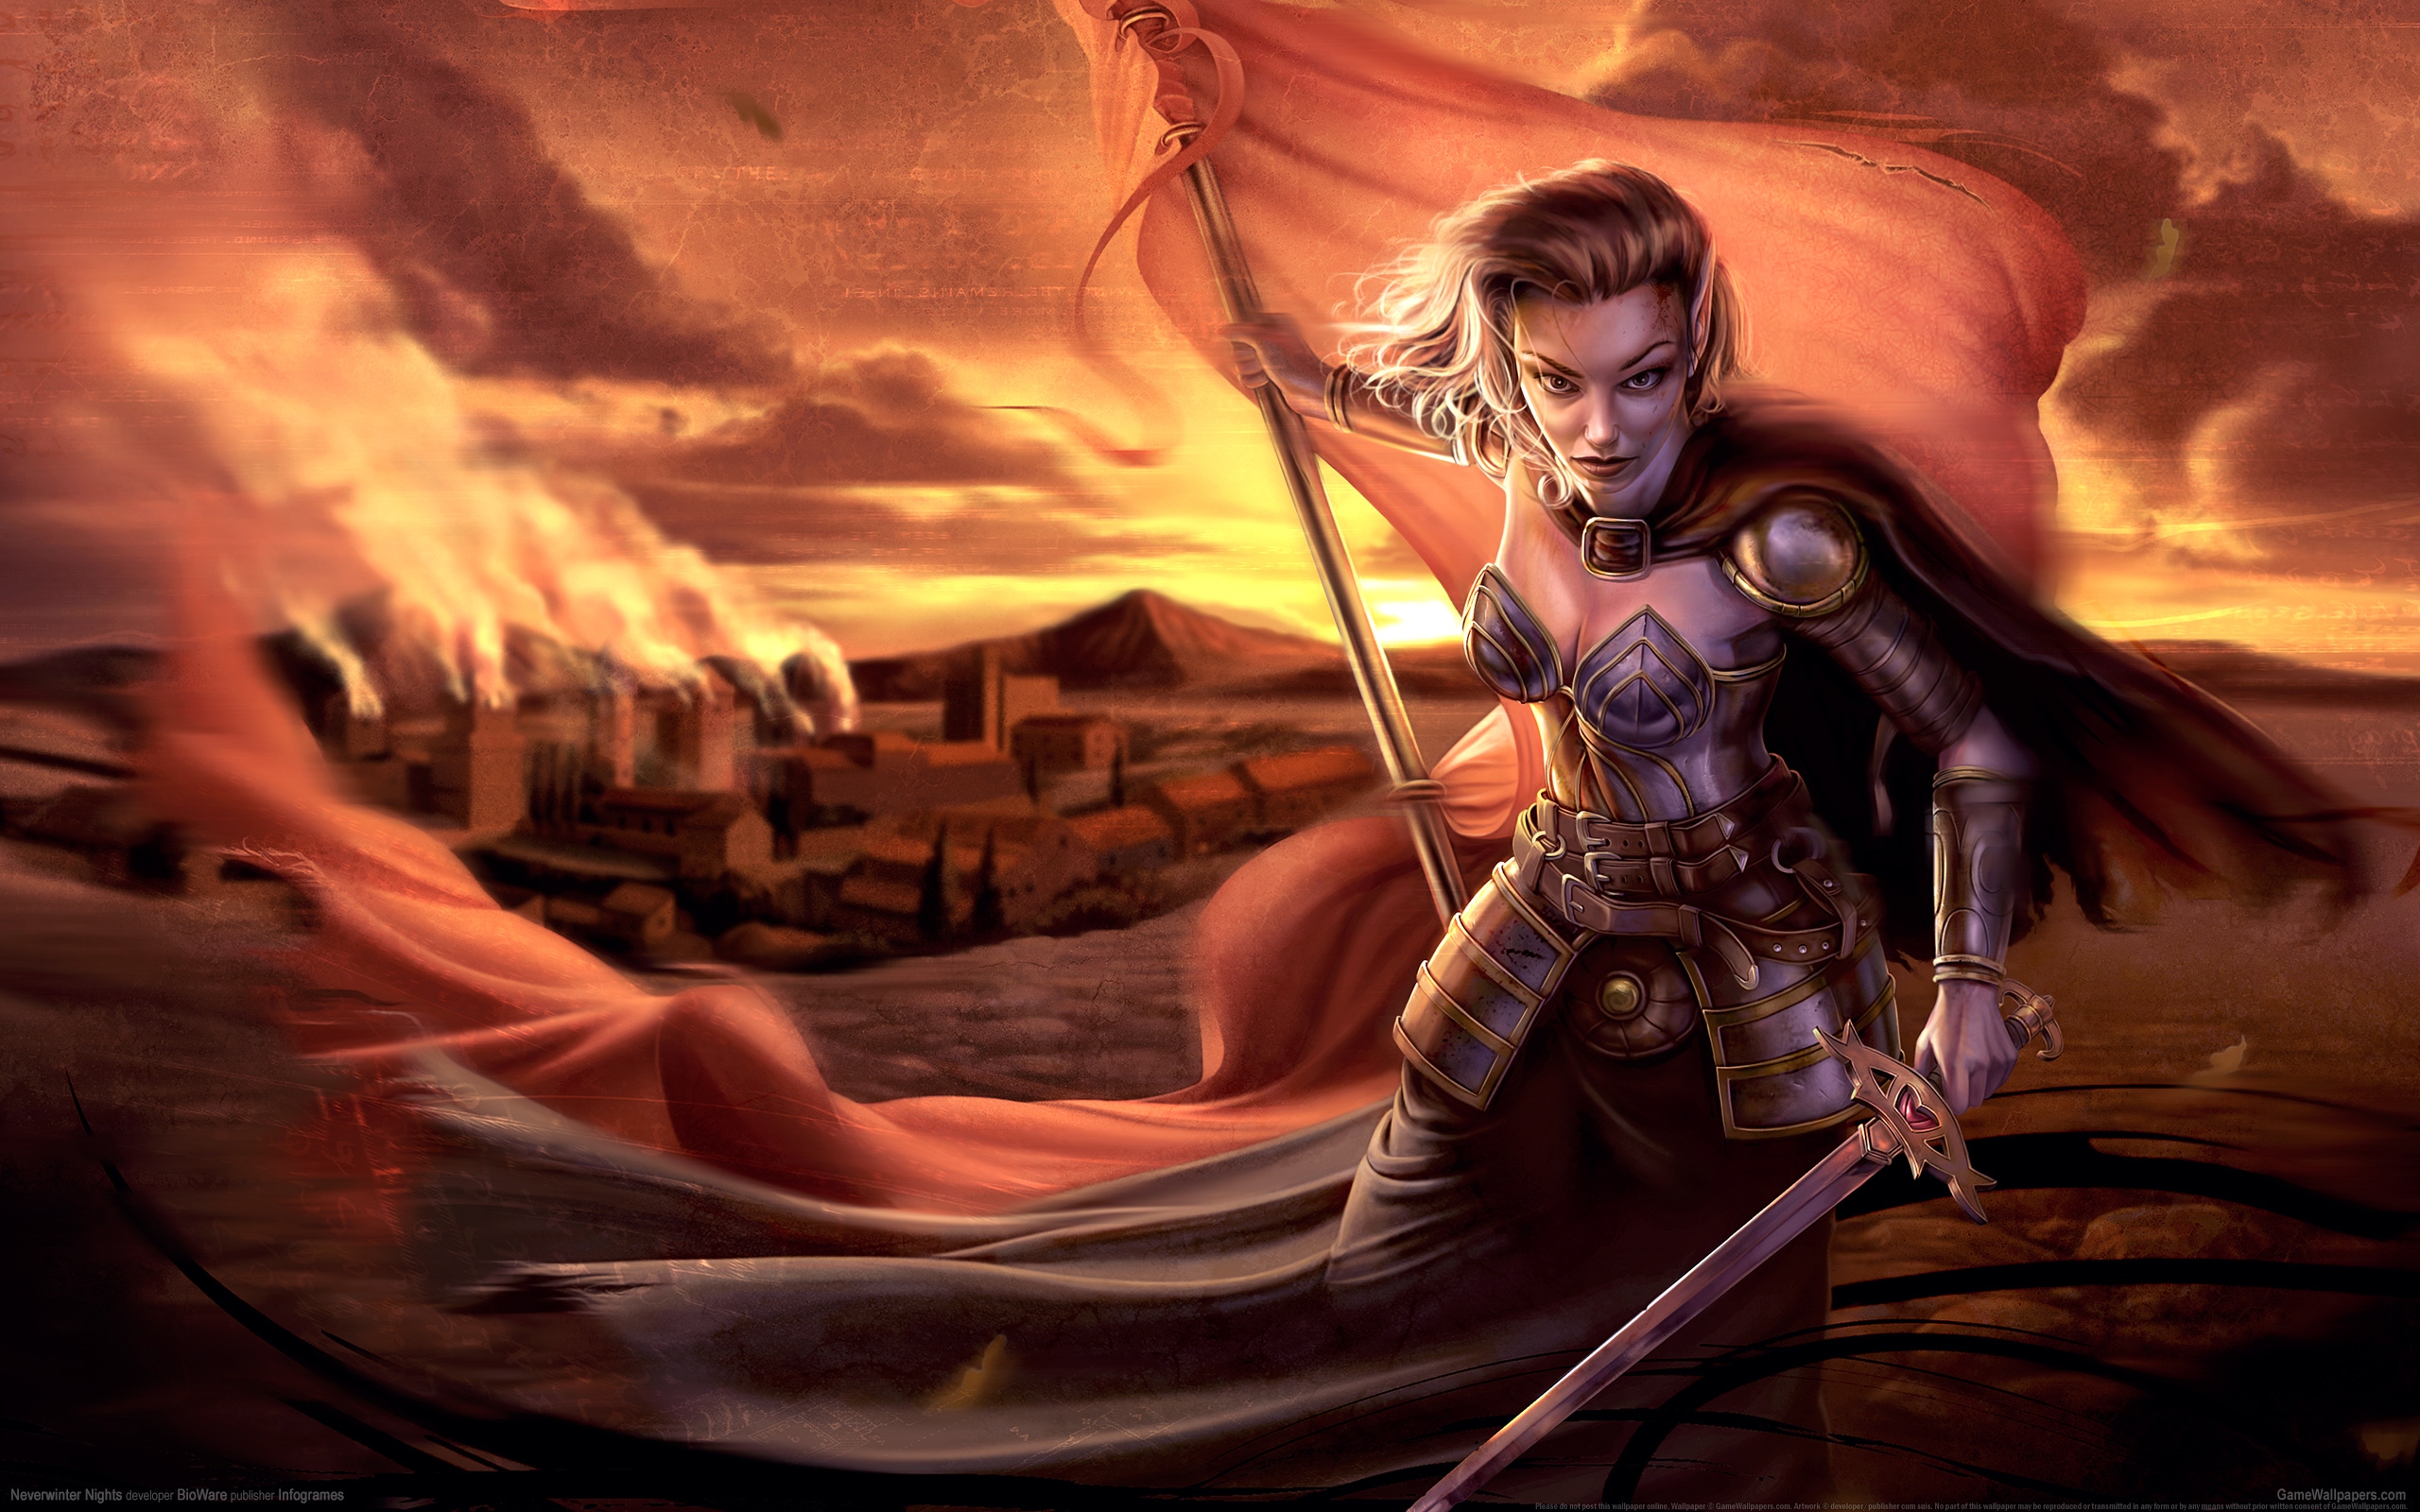 Neverwinter Nights 2560x1600 wallpaper or background 11